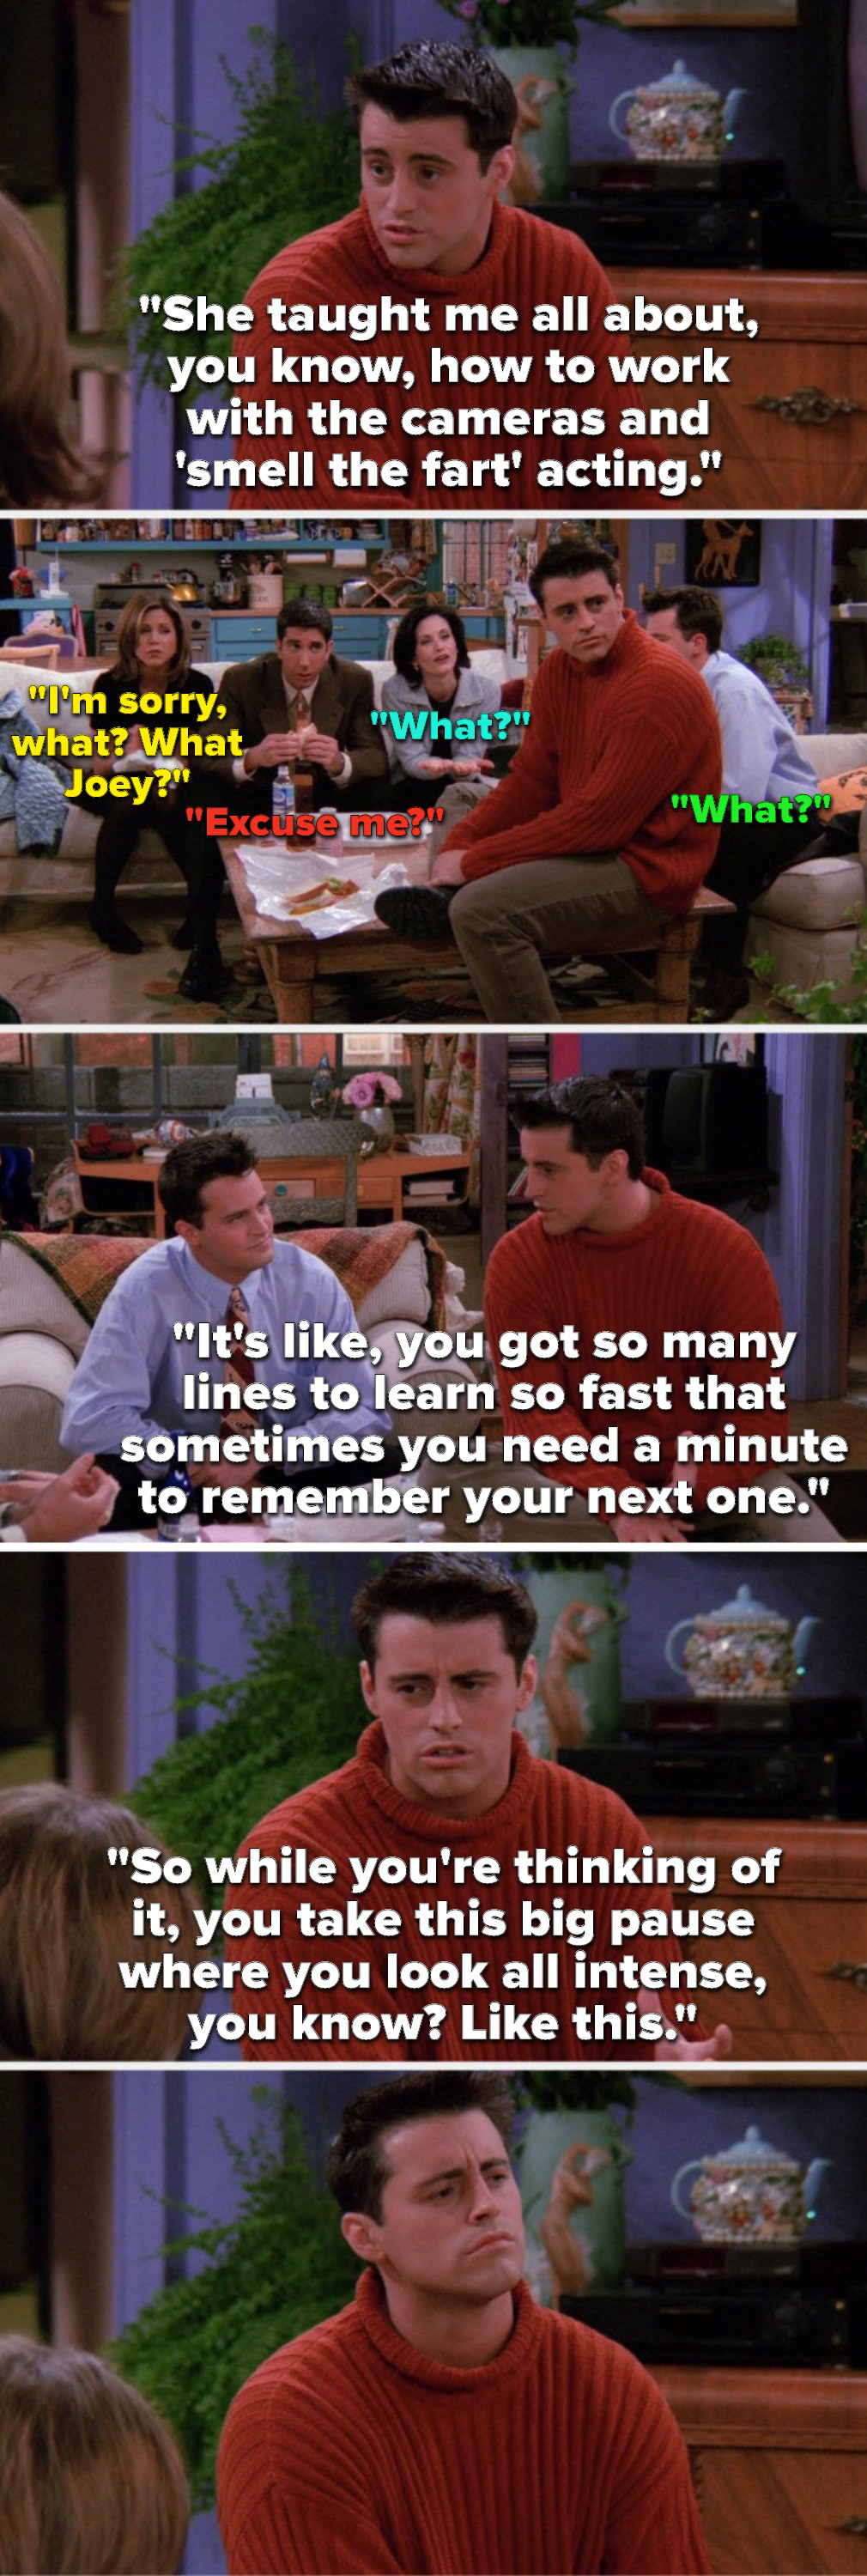 Joey says, She taught me smell the fart acting, Rachel, Ross, Monica, and Chandler say, What, Joey says, You have so many lines to learn so fast sometimes you need a minute to remember the next one, so you pause and look all intense, and he makes the face